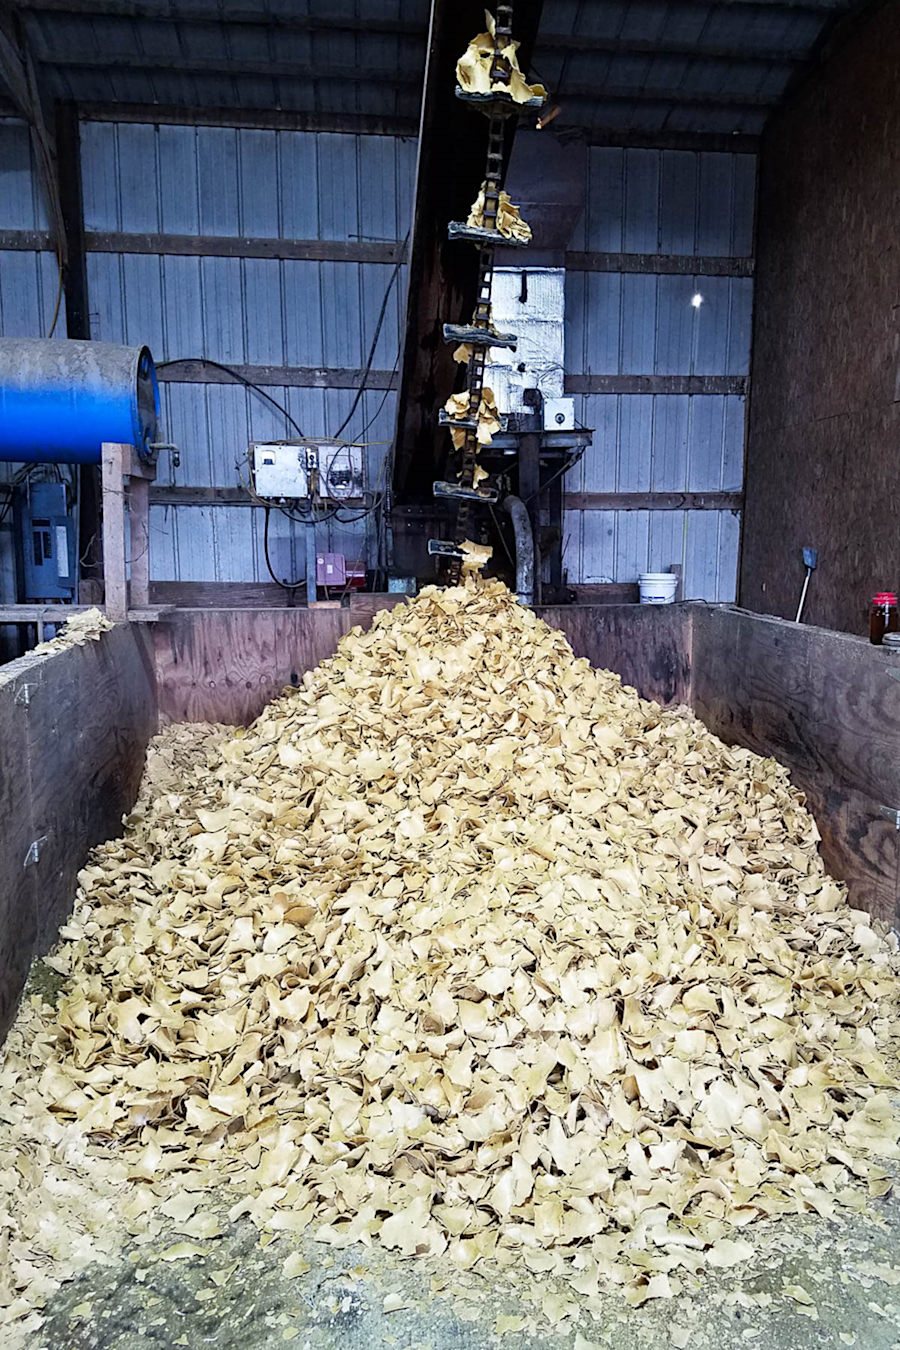 soybeans are crushed at Riverhill Farms to extract the oil used for biodiesel